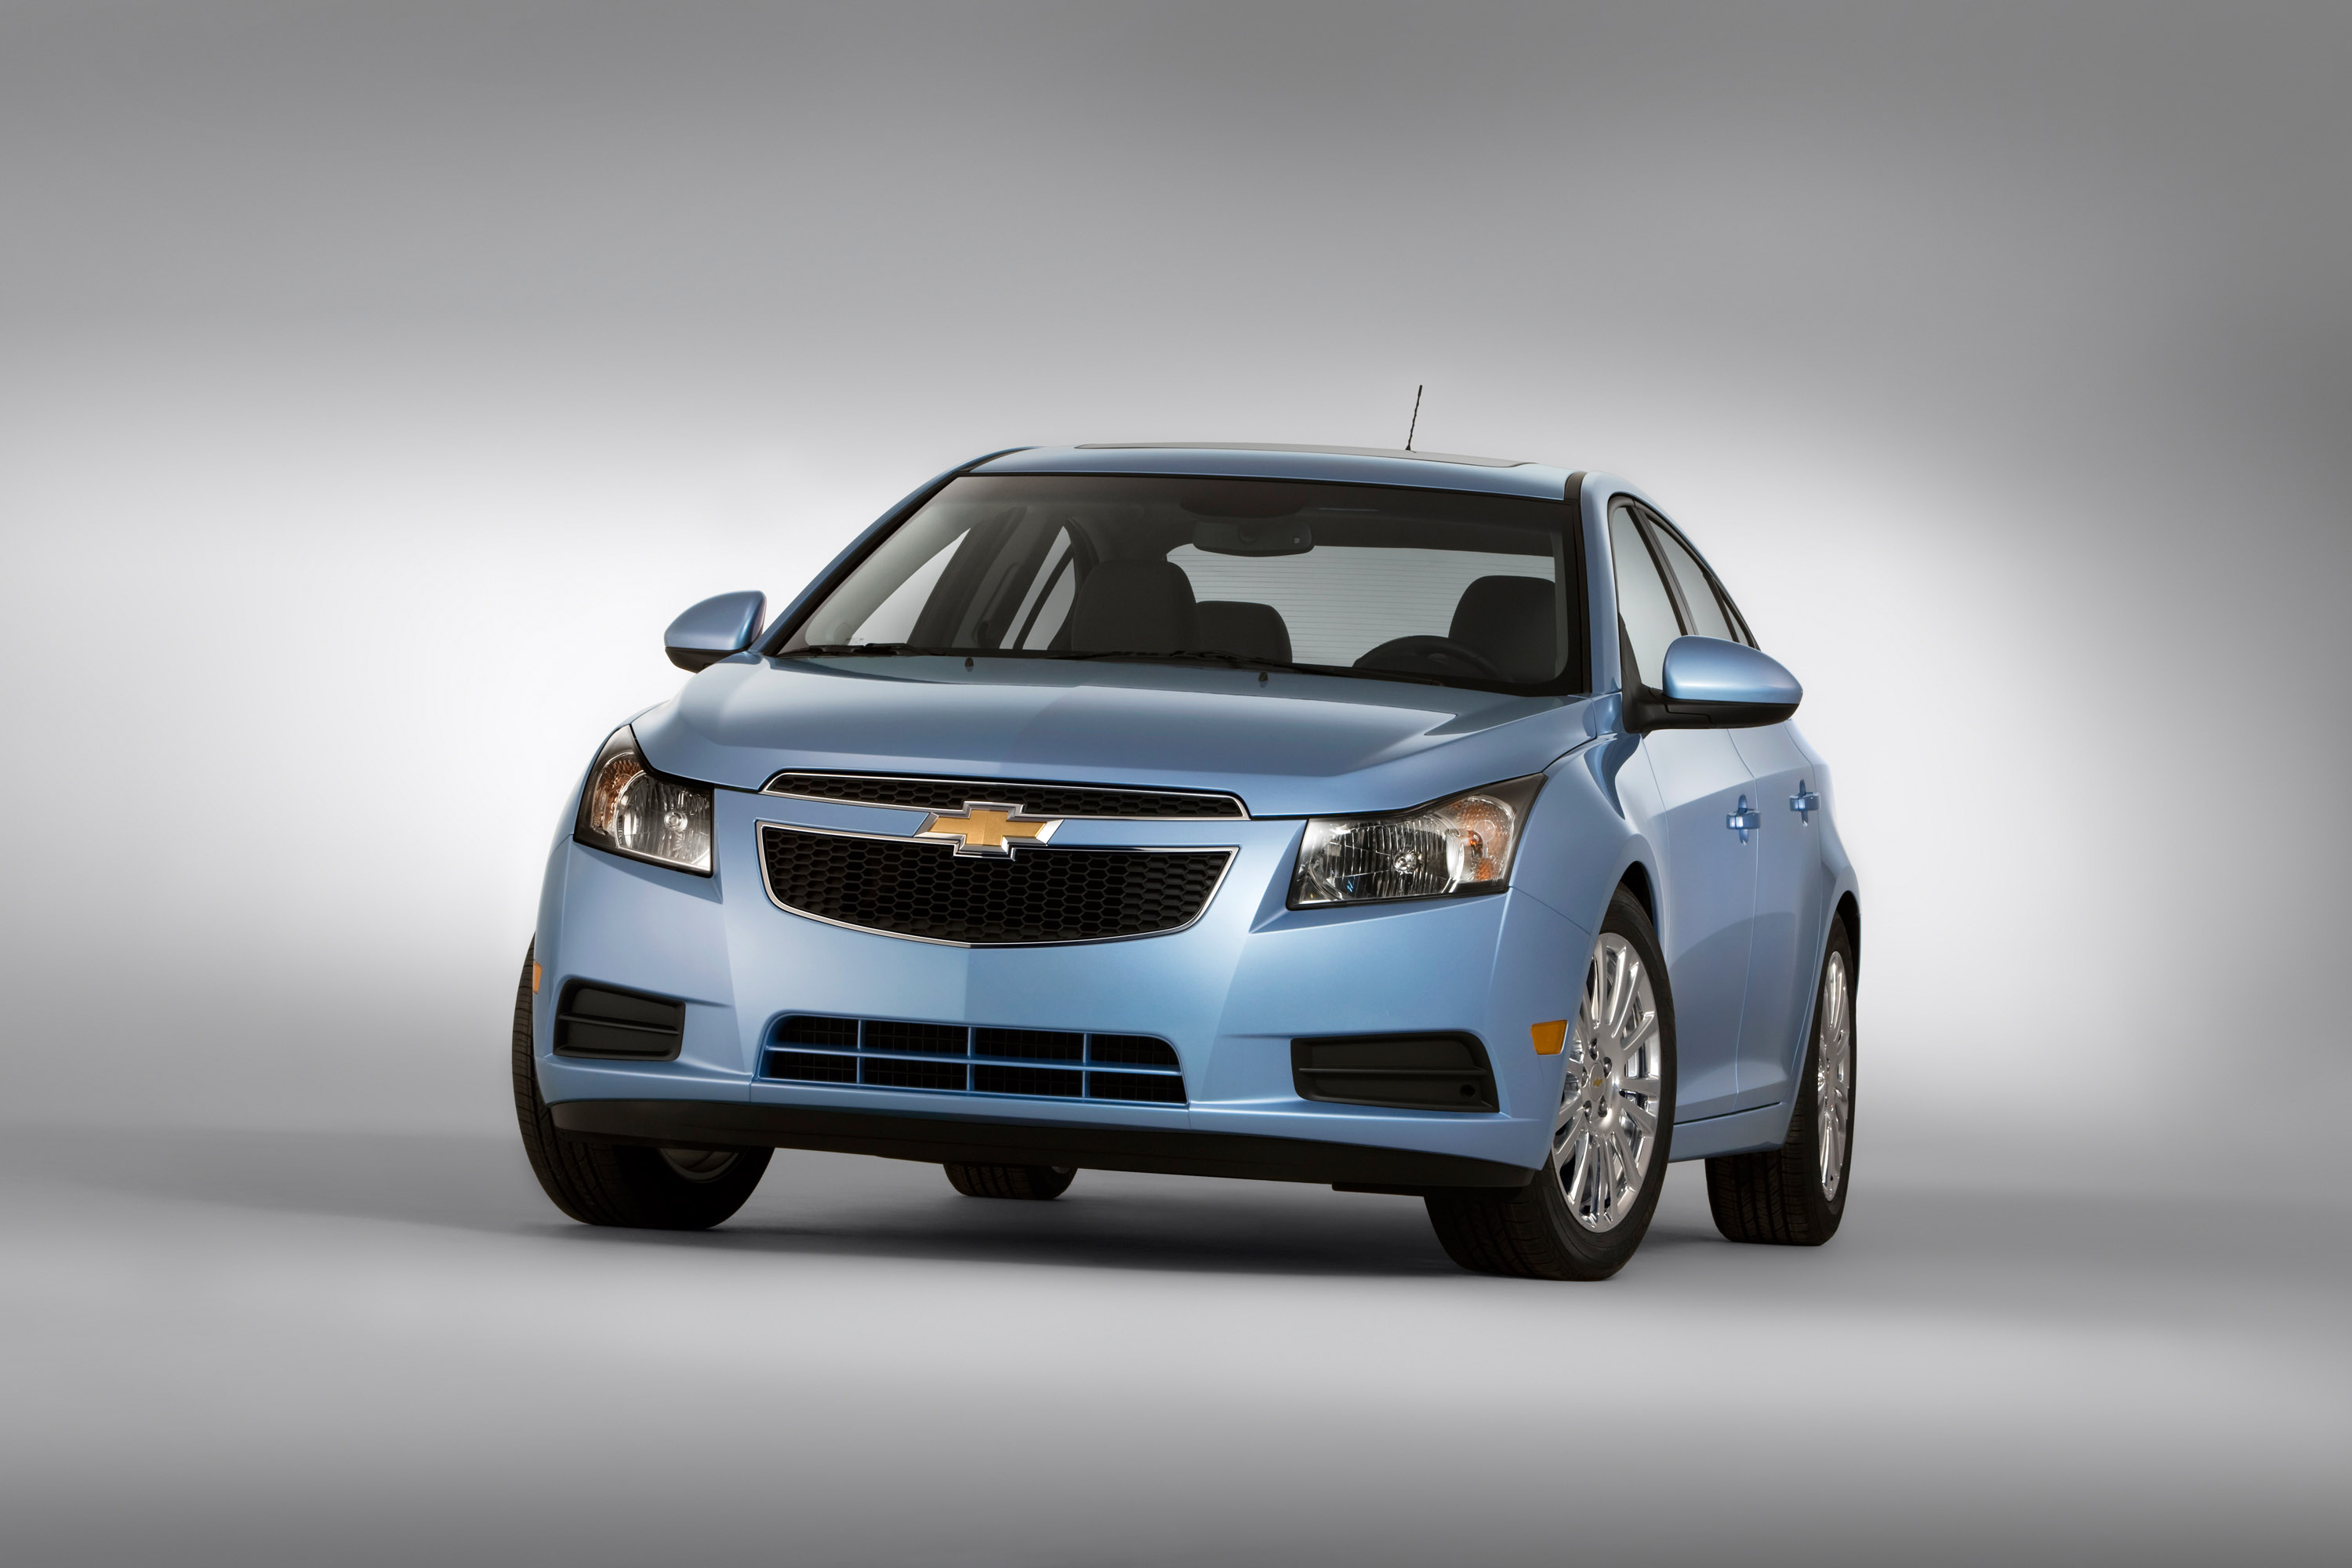 2011 Chevy Cruze comes in September